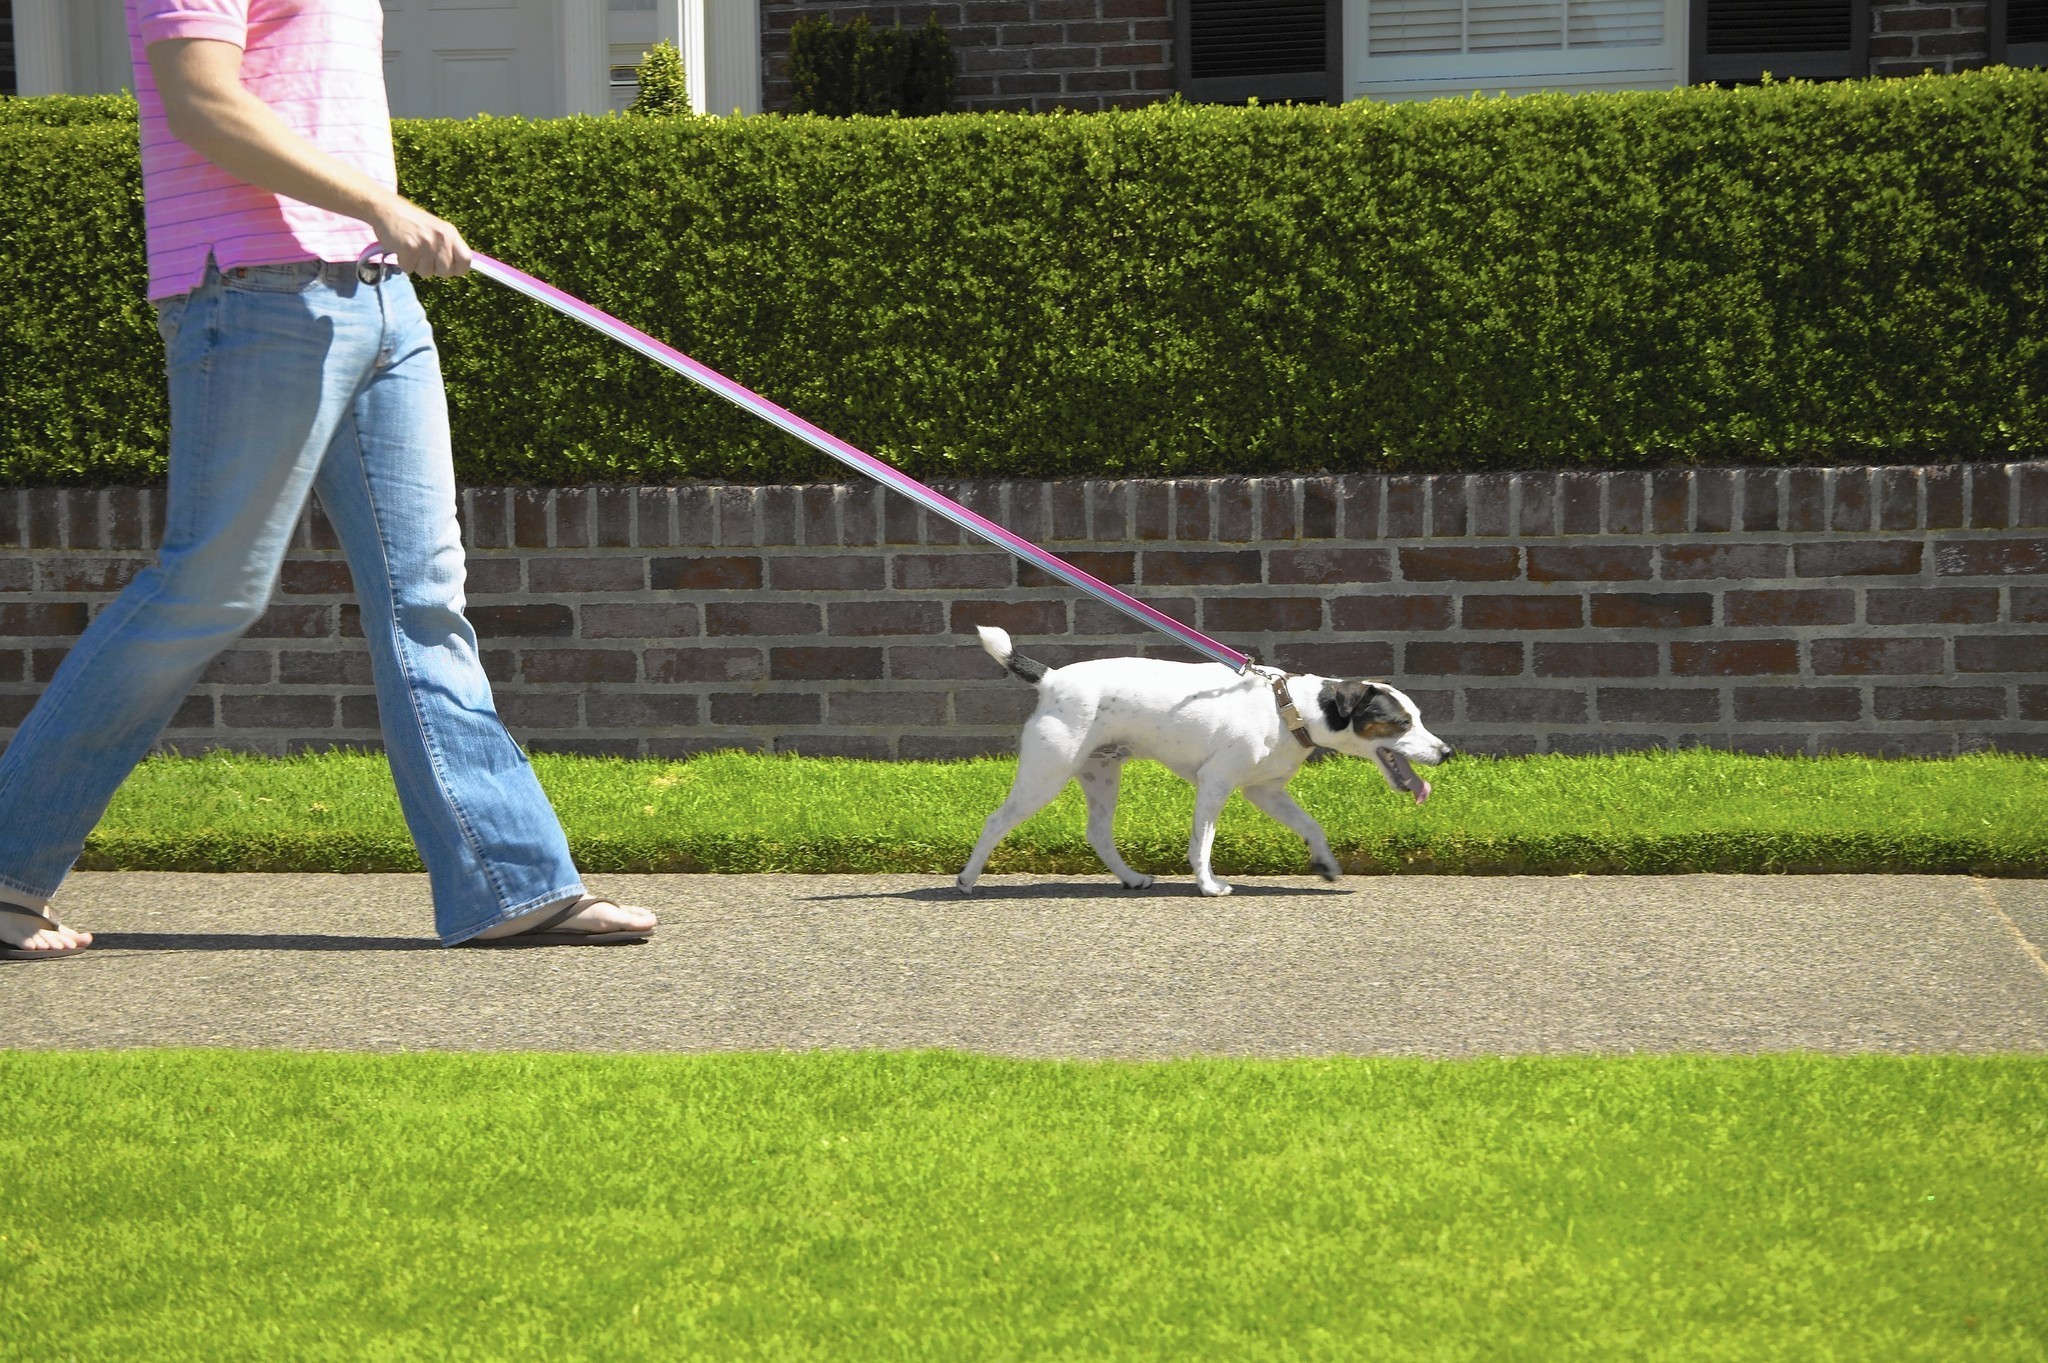 Dog walking seniors are healthier but think hard before